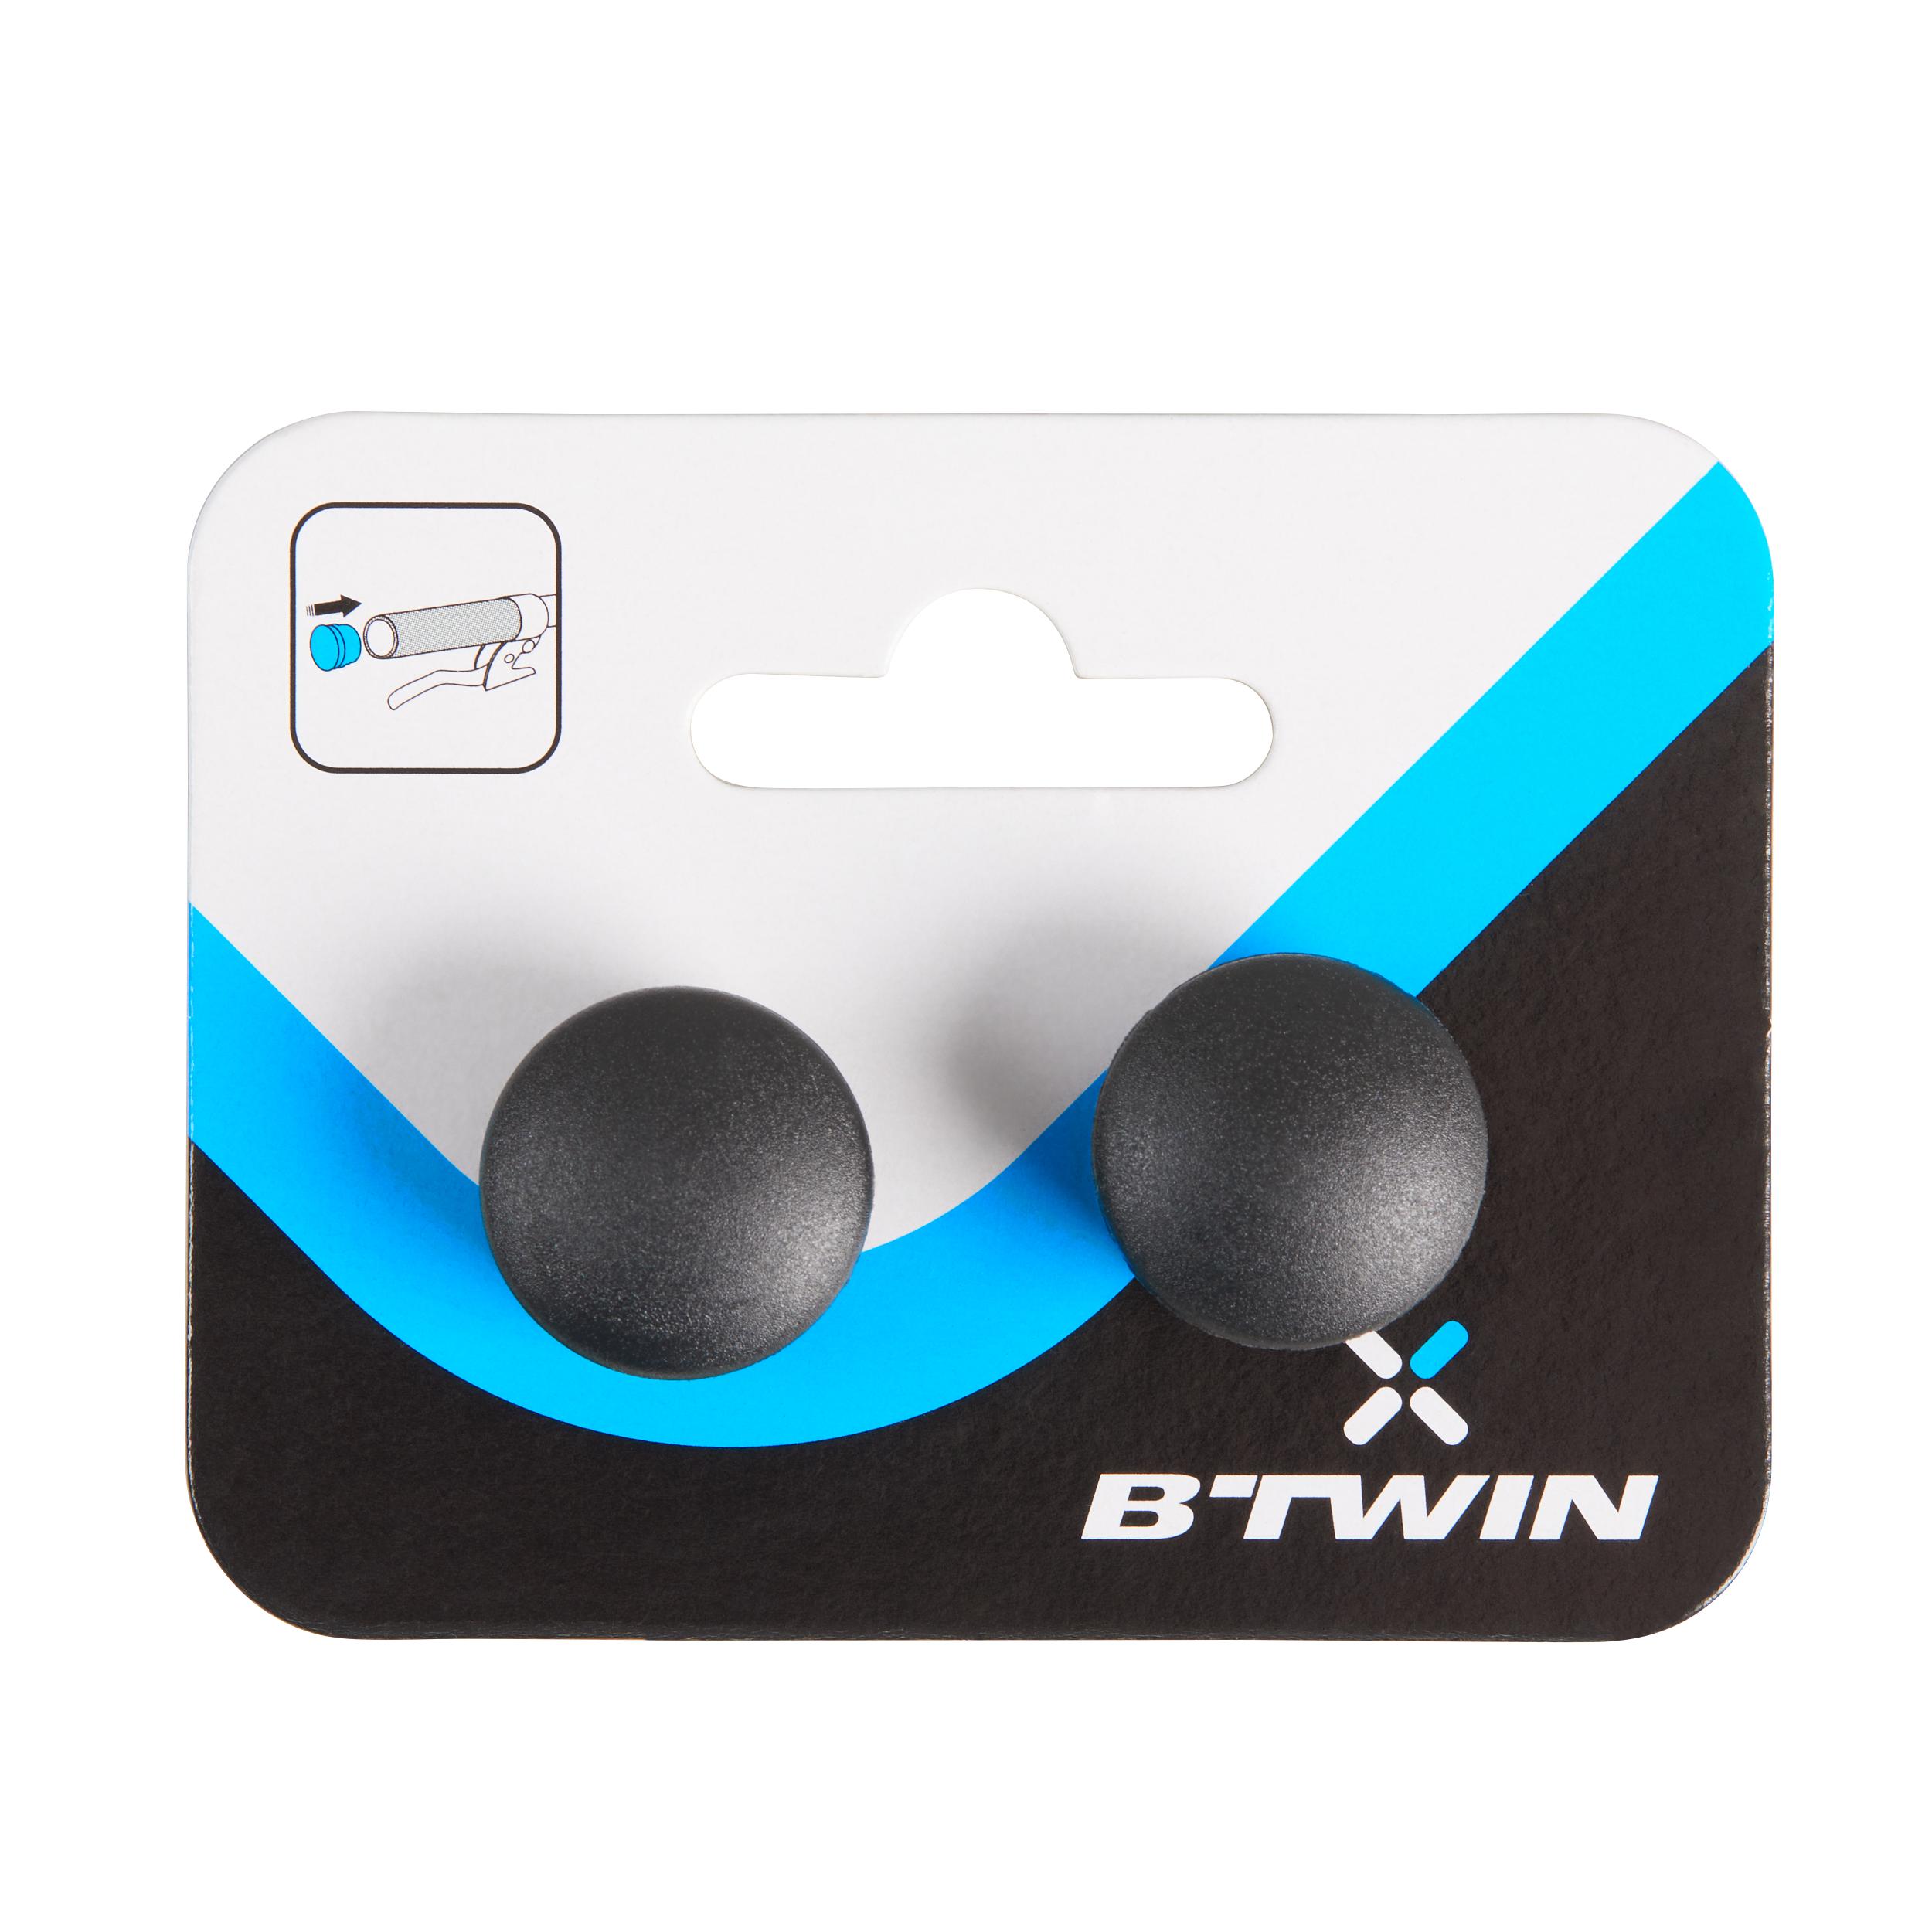 btwin spare parts